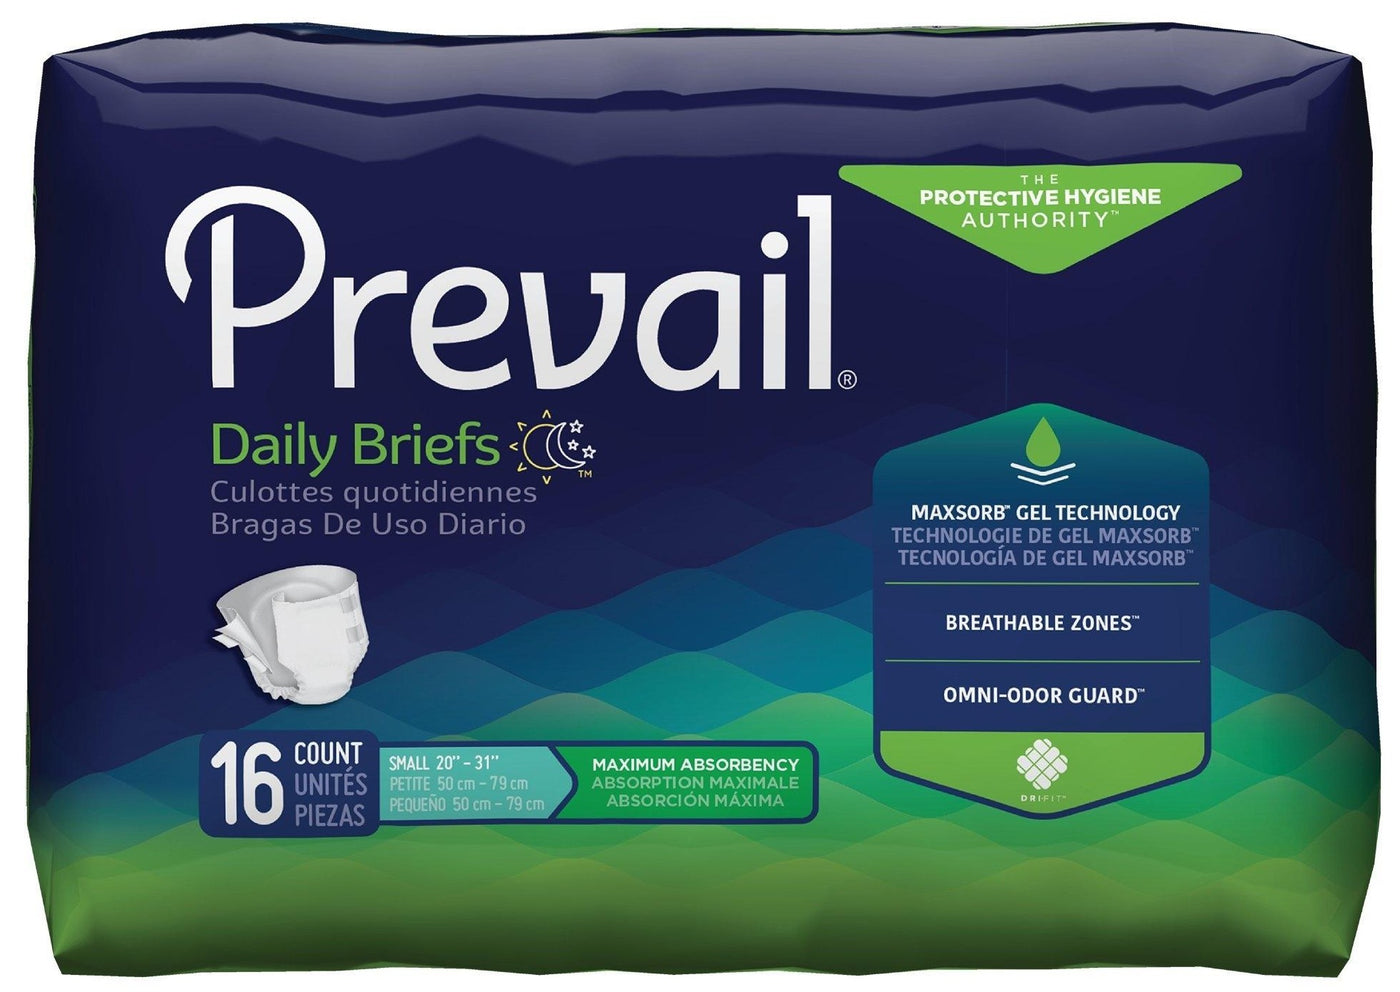 Adult diapers for incontinence for big kids - Prevail Youth